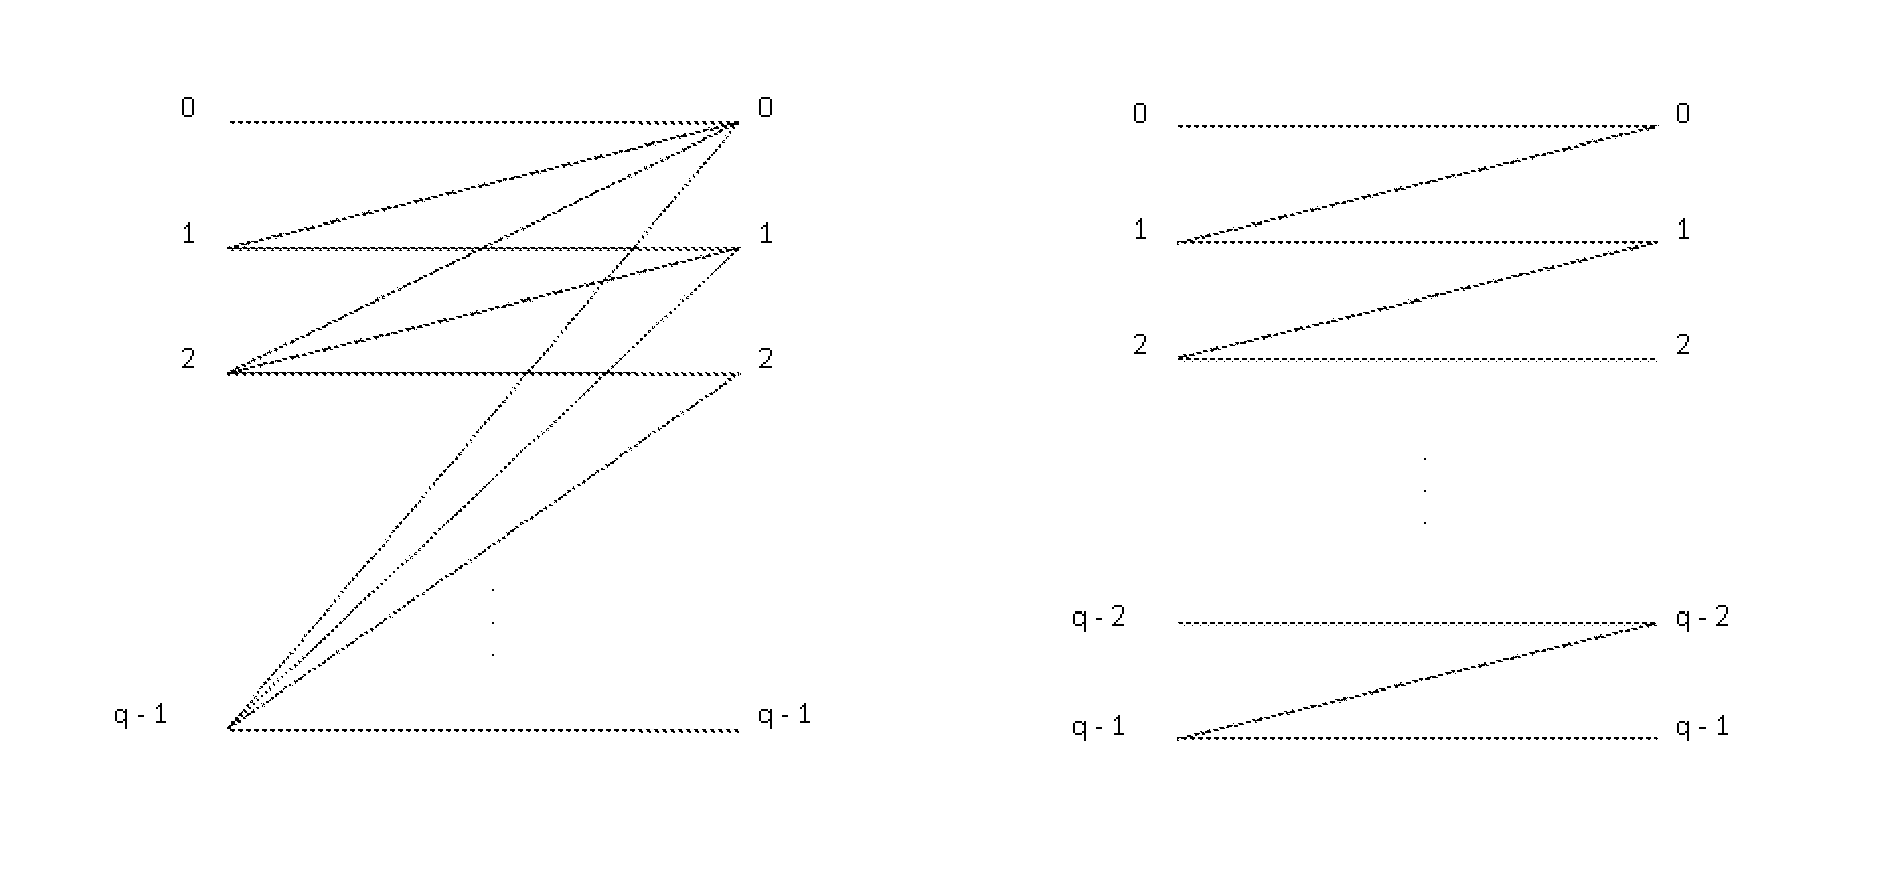 System and Method Having Optimal, Systematic q-Ary Codes for Correcting All Asymmetric and Symmetric Errors of Limited Magnitude